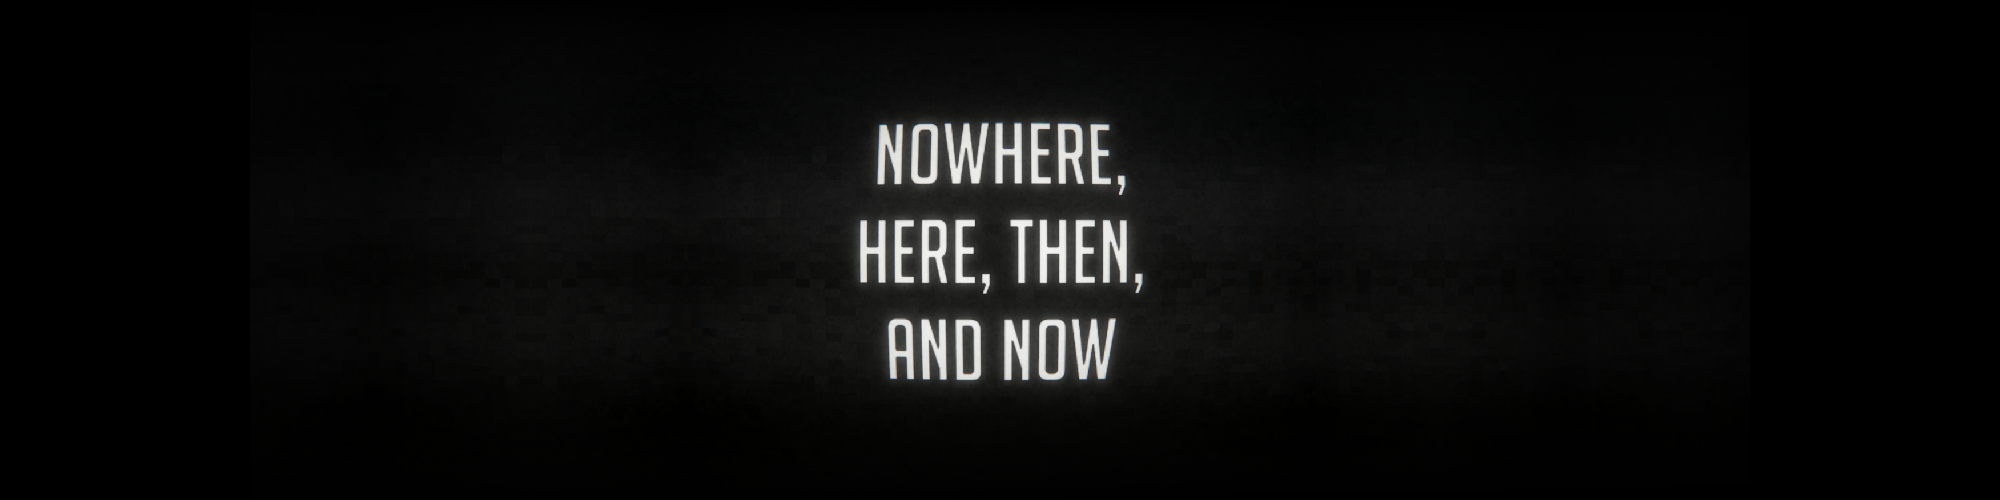 Nowhere, Here, Then, and Now